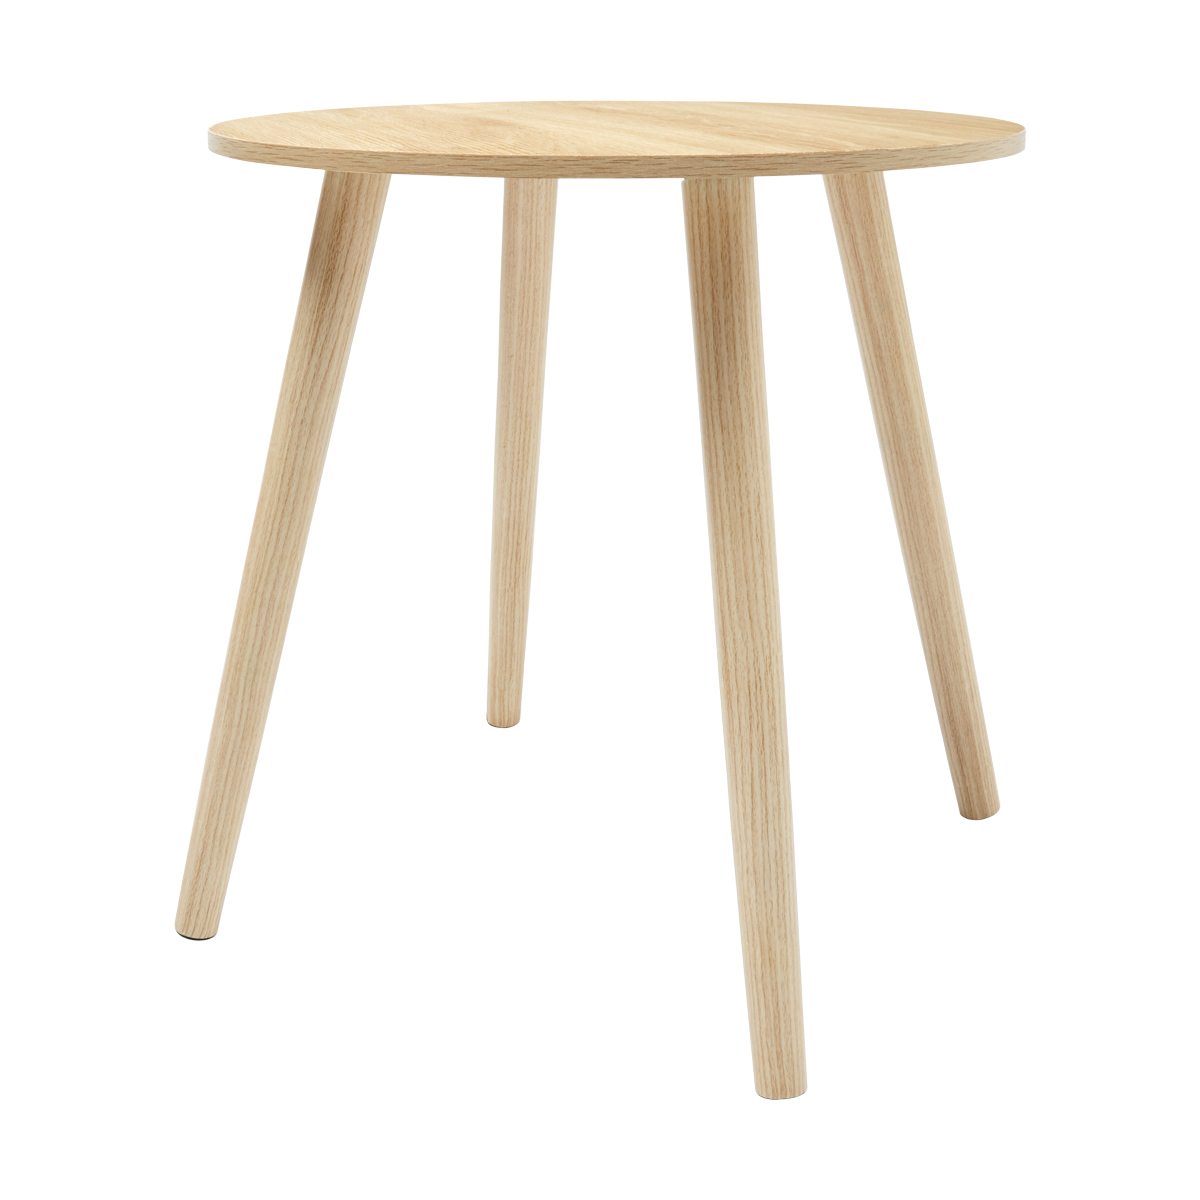 Timber side table